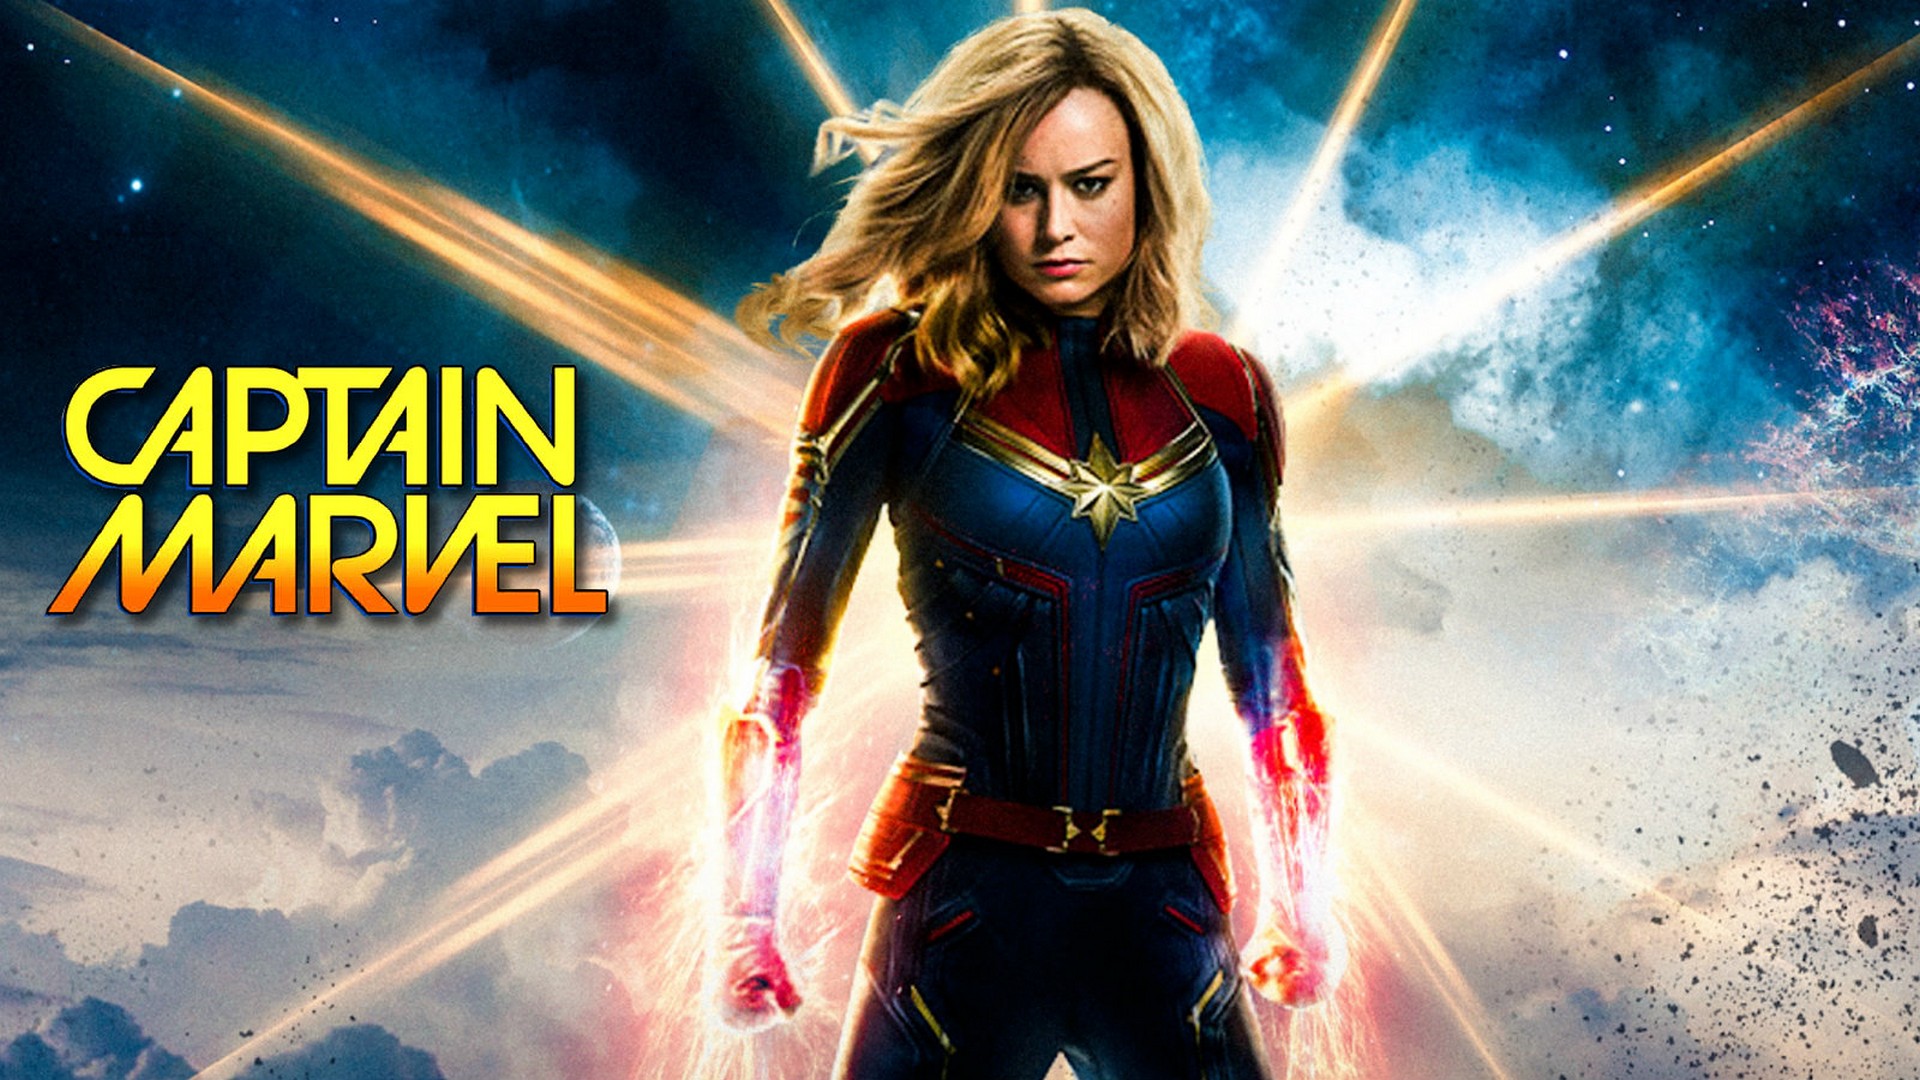 Captain Marvel 2019 Wallpaper with high-resolution 1920x1080 pixel. You can use this poster wallpaper for your Desktop Computers, Mac Screensavers, Windows Backgrounds, iPhone Wallpapers, Tablet or Android Lock screen and another Mobile device